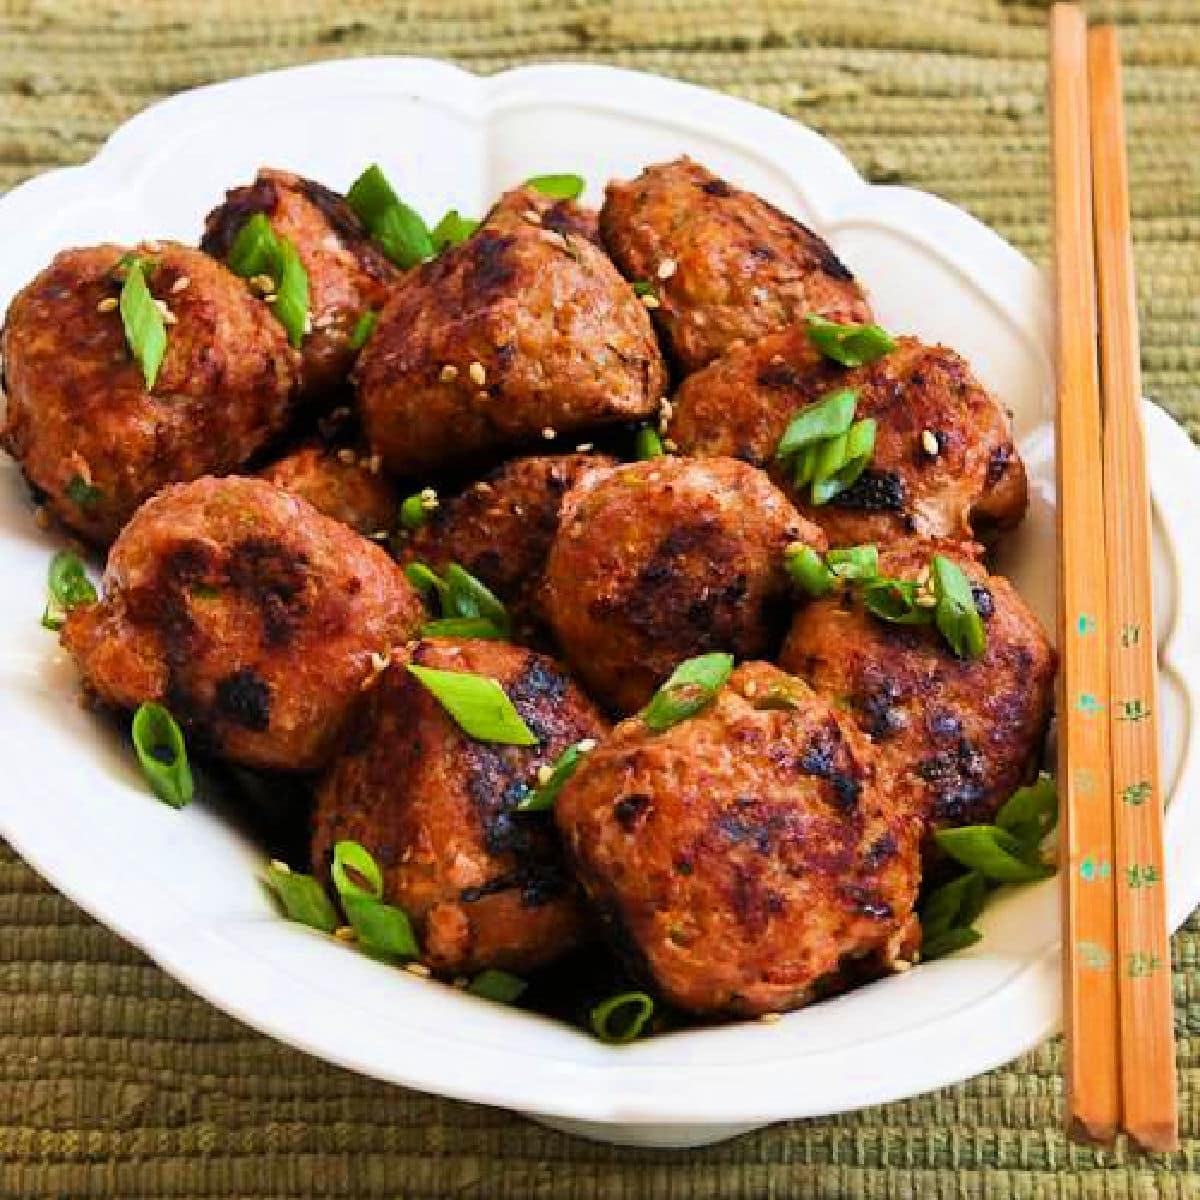 Grilled Sriracha Turkey Meatballs shown on serving plate with chopsticks.